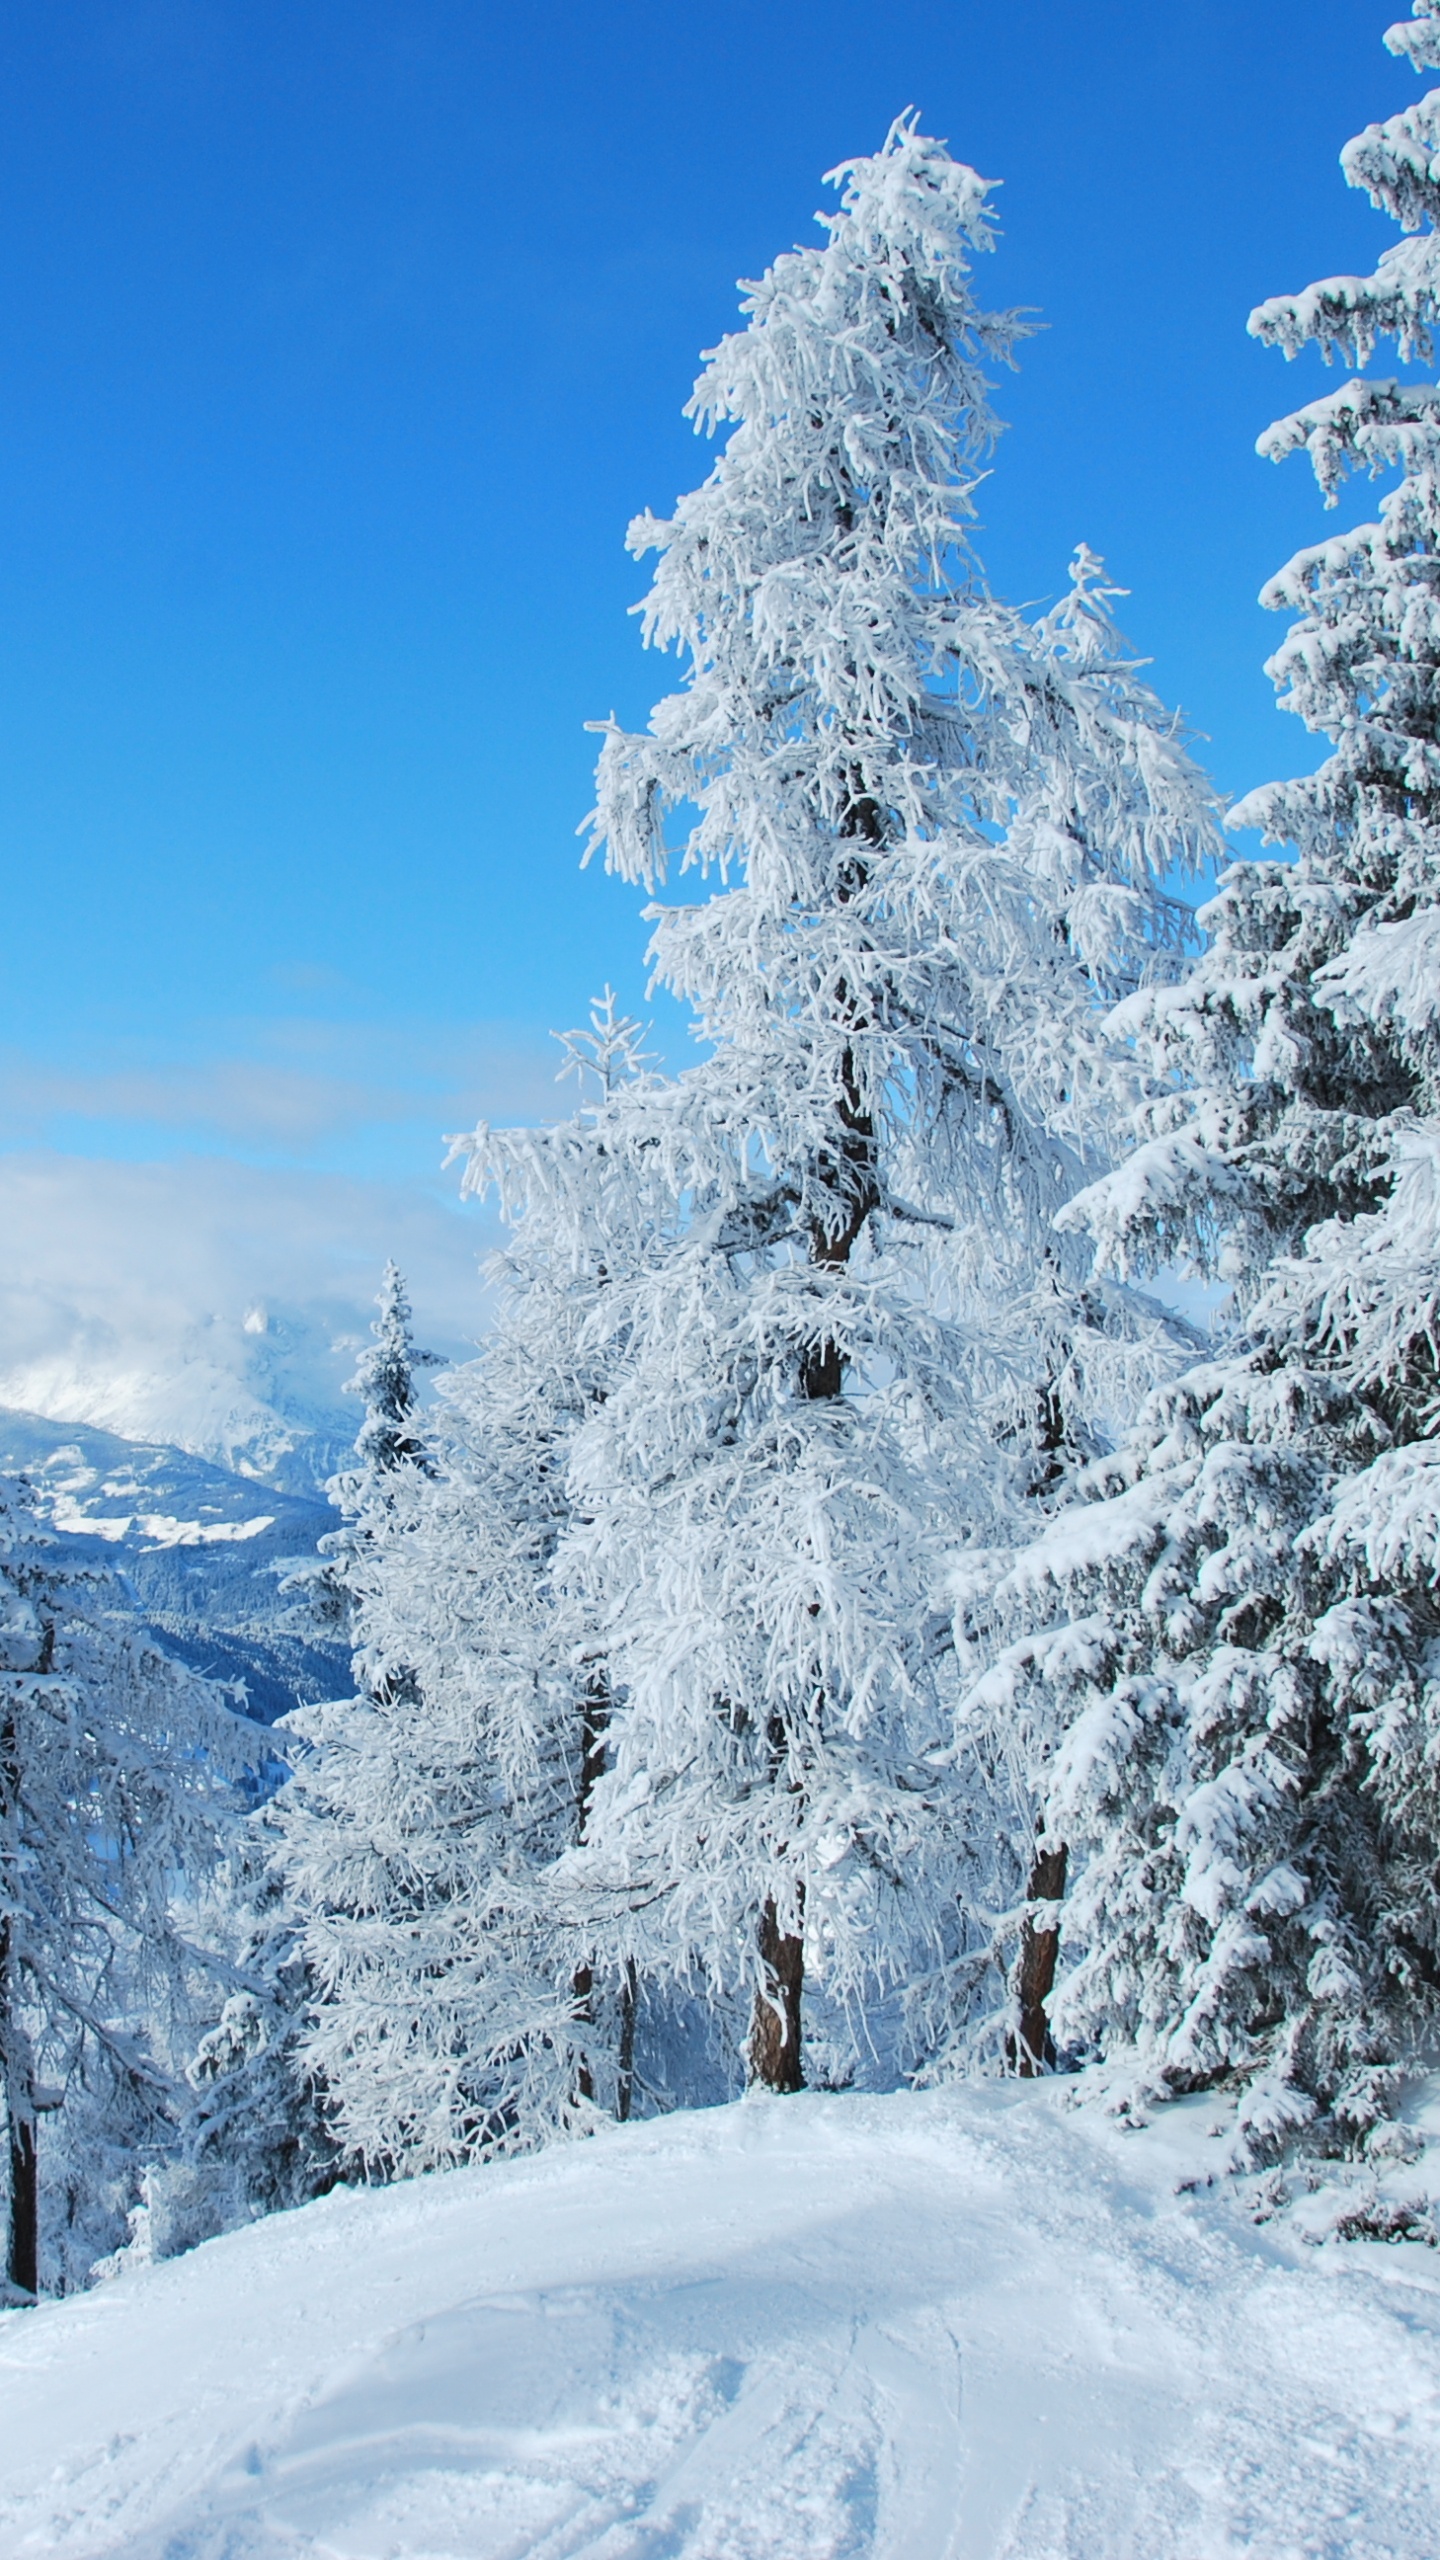 Snow Covered Trees and Mountains During Daytime. Wallpaper in 1440x2560 Resolution